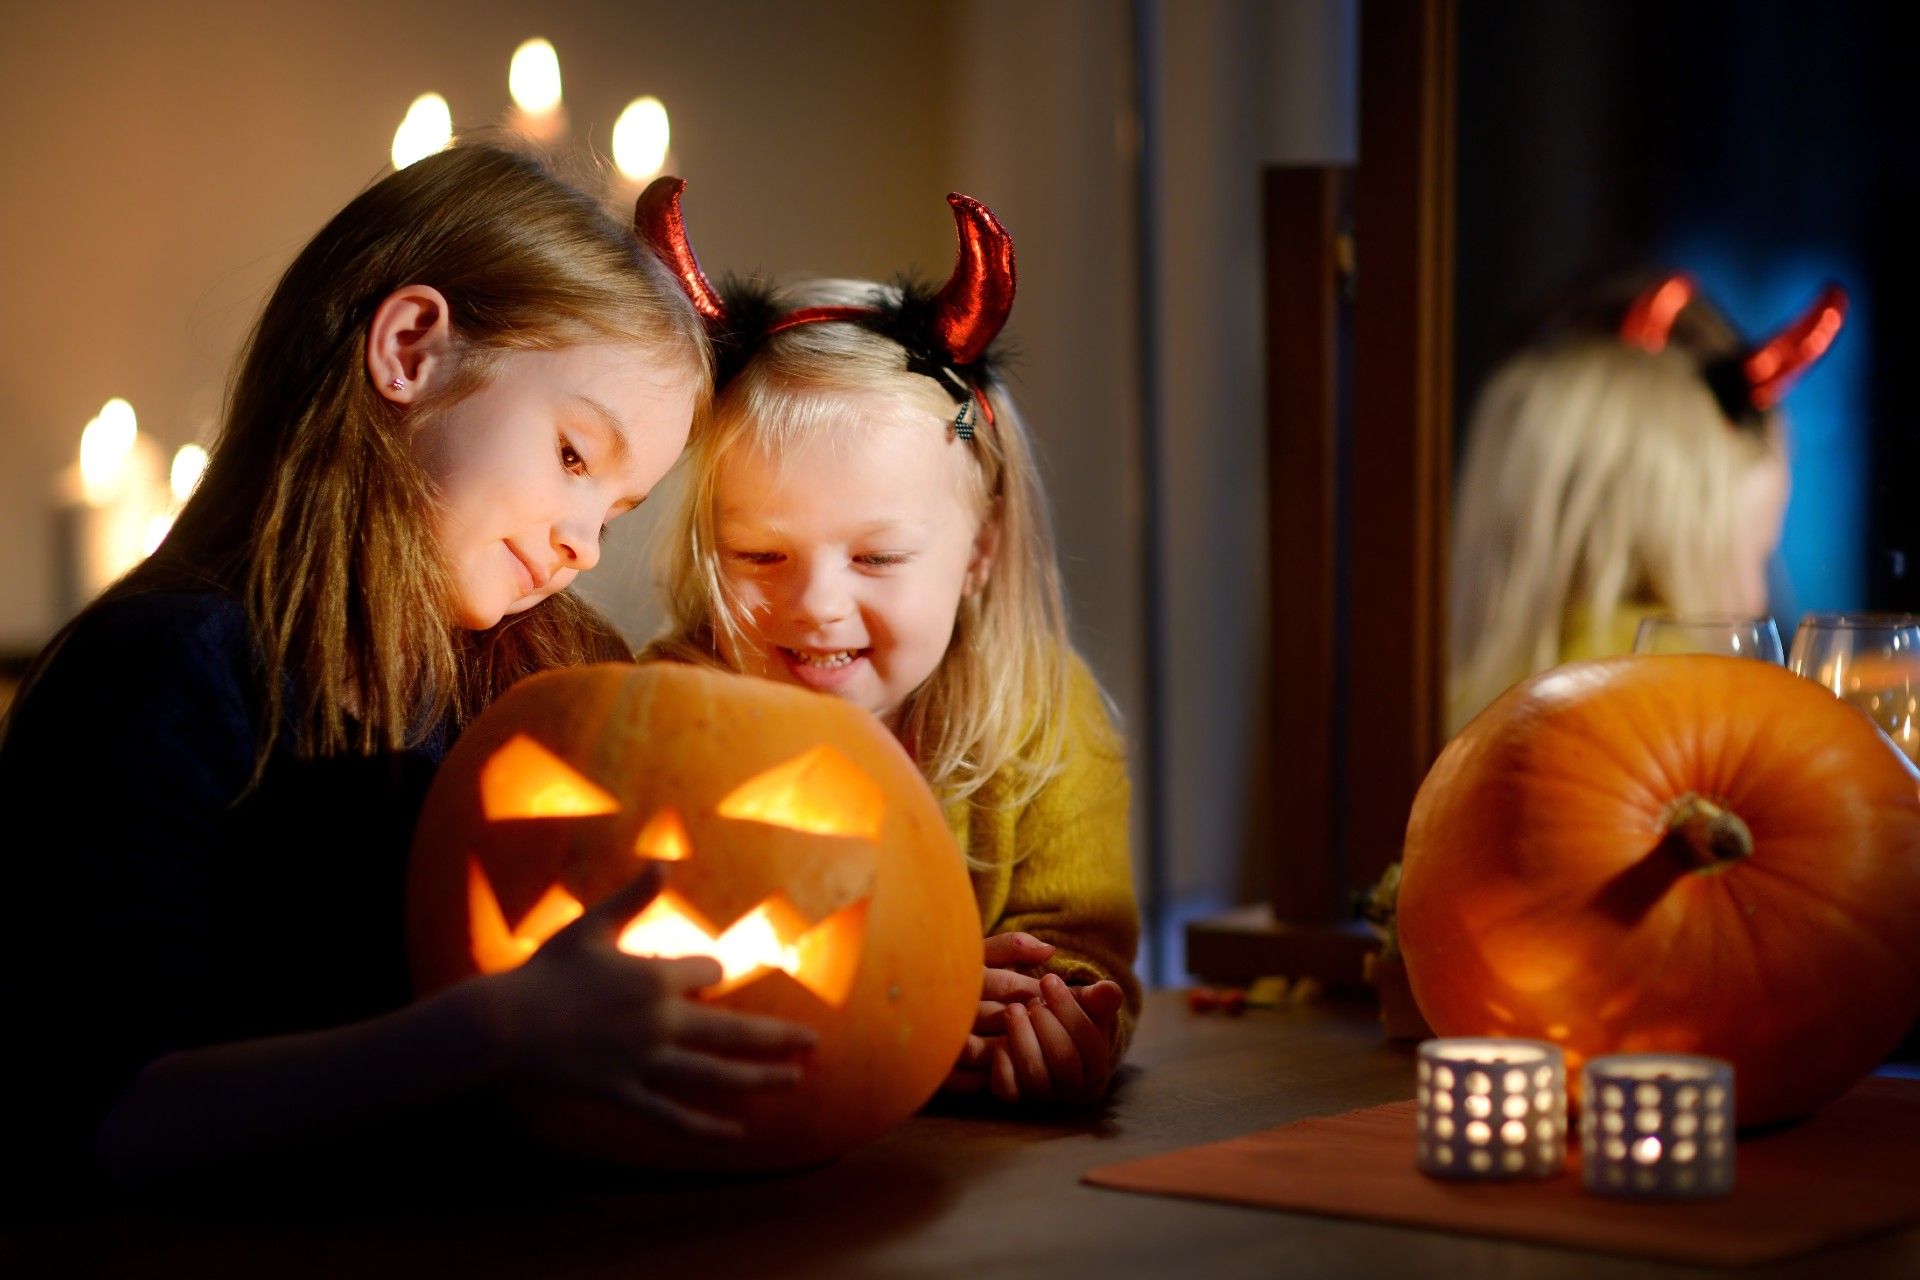 Two young girls carve light a jack-o-lantern, with candles in the background - safety tips on halloween